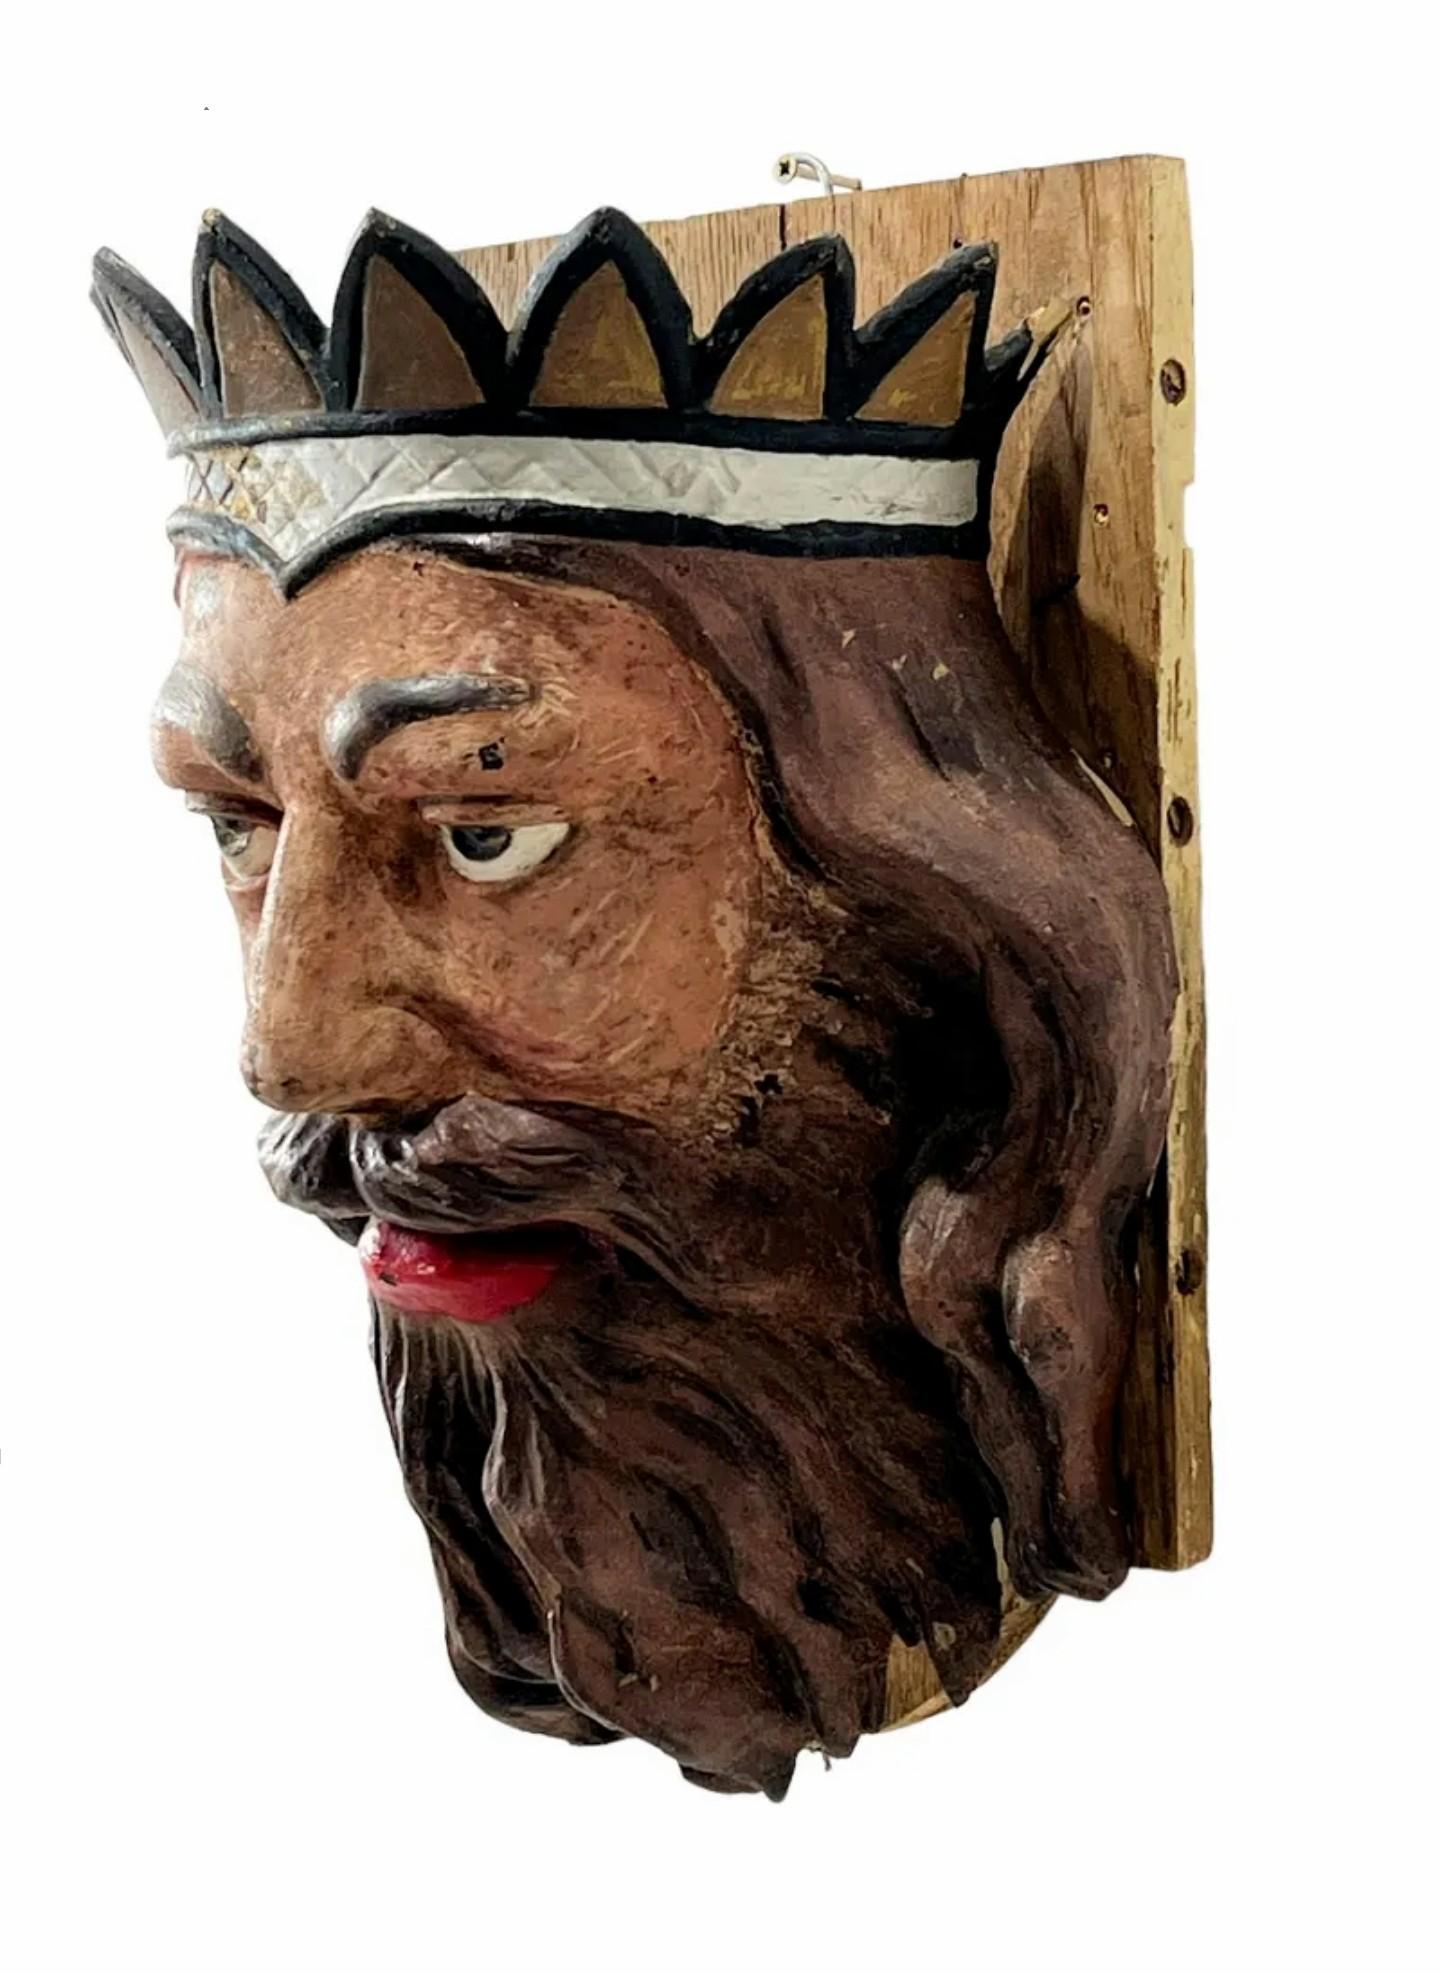 A rare European antique hand painted cast iron carnival carousel embellishment.

Once decorating a 19th century country fair carousel amusement ride, the sculptural ornament depicting a medieval European king with crown, wavy hair, and richly